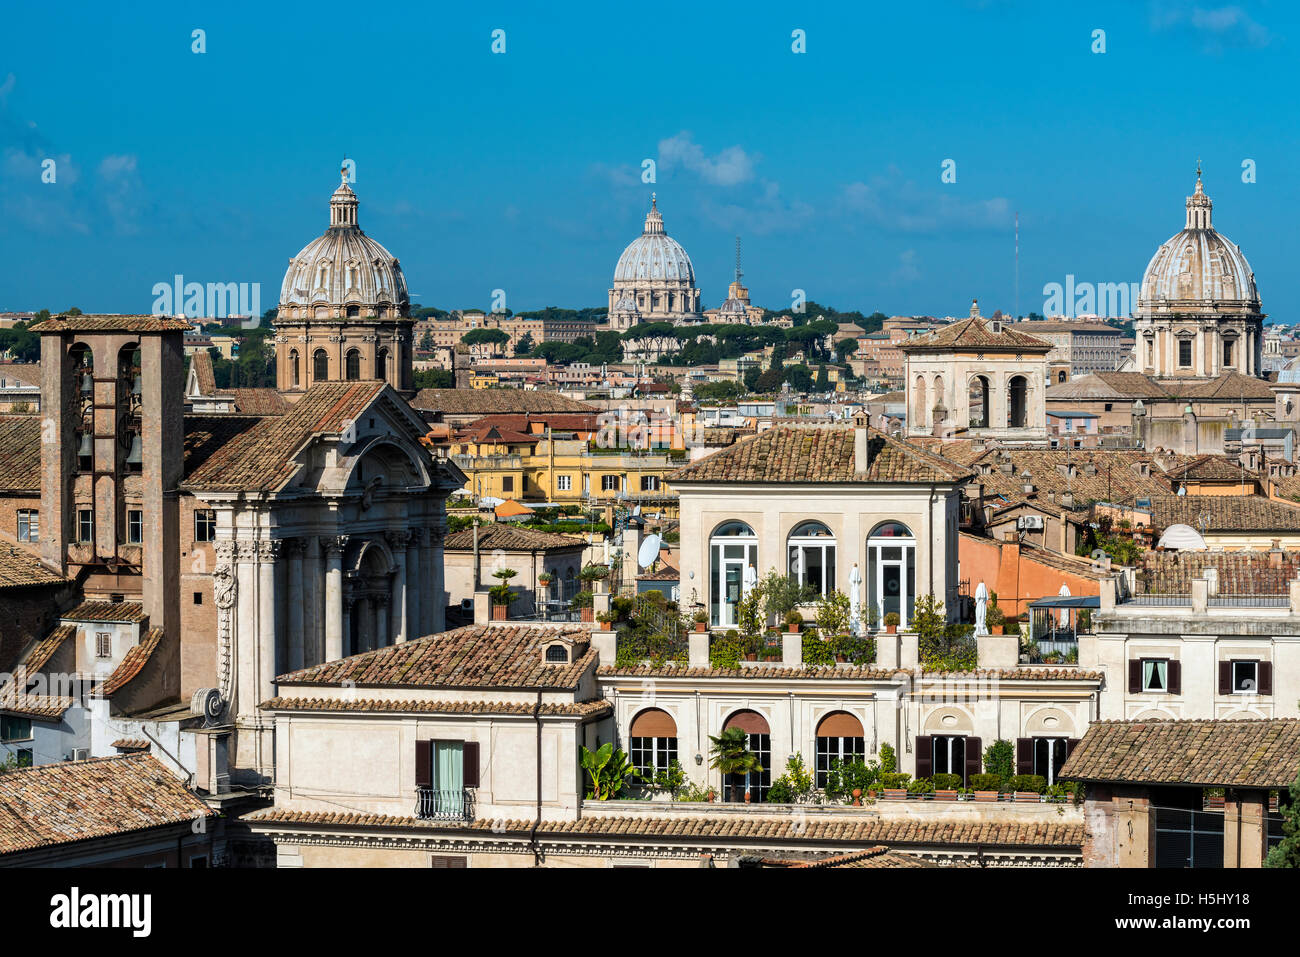 City skyline with St. Peter's Basilica in the background, Rome, Italy Stock Photo